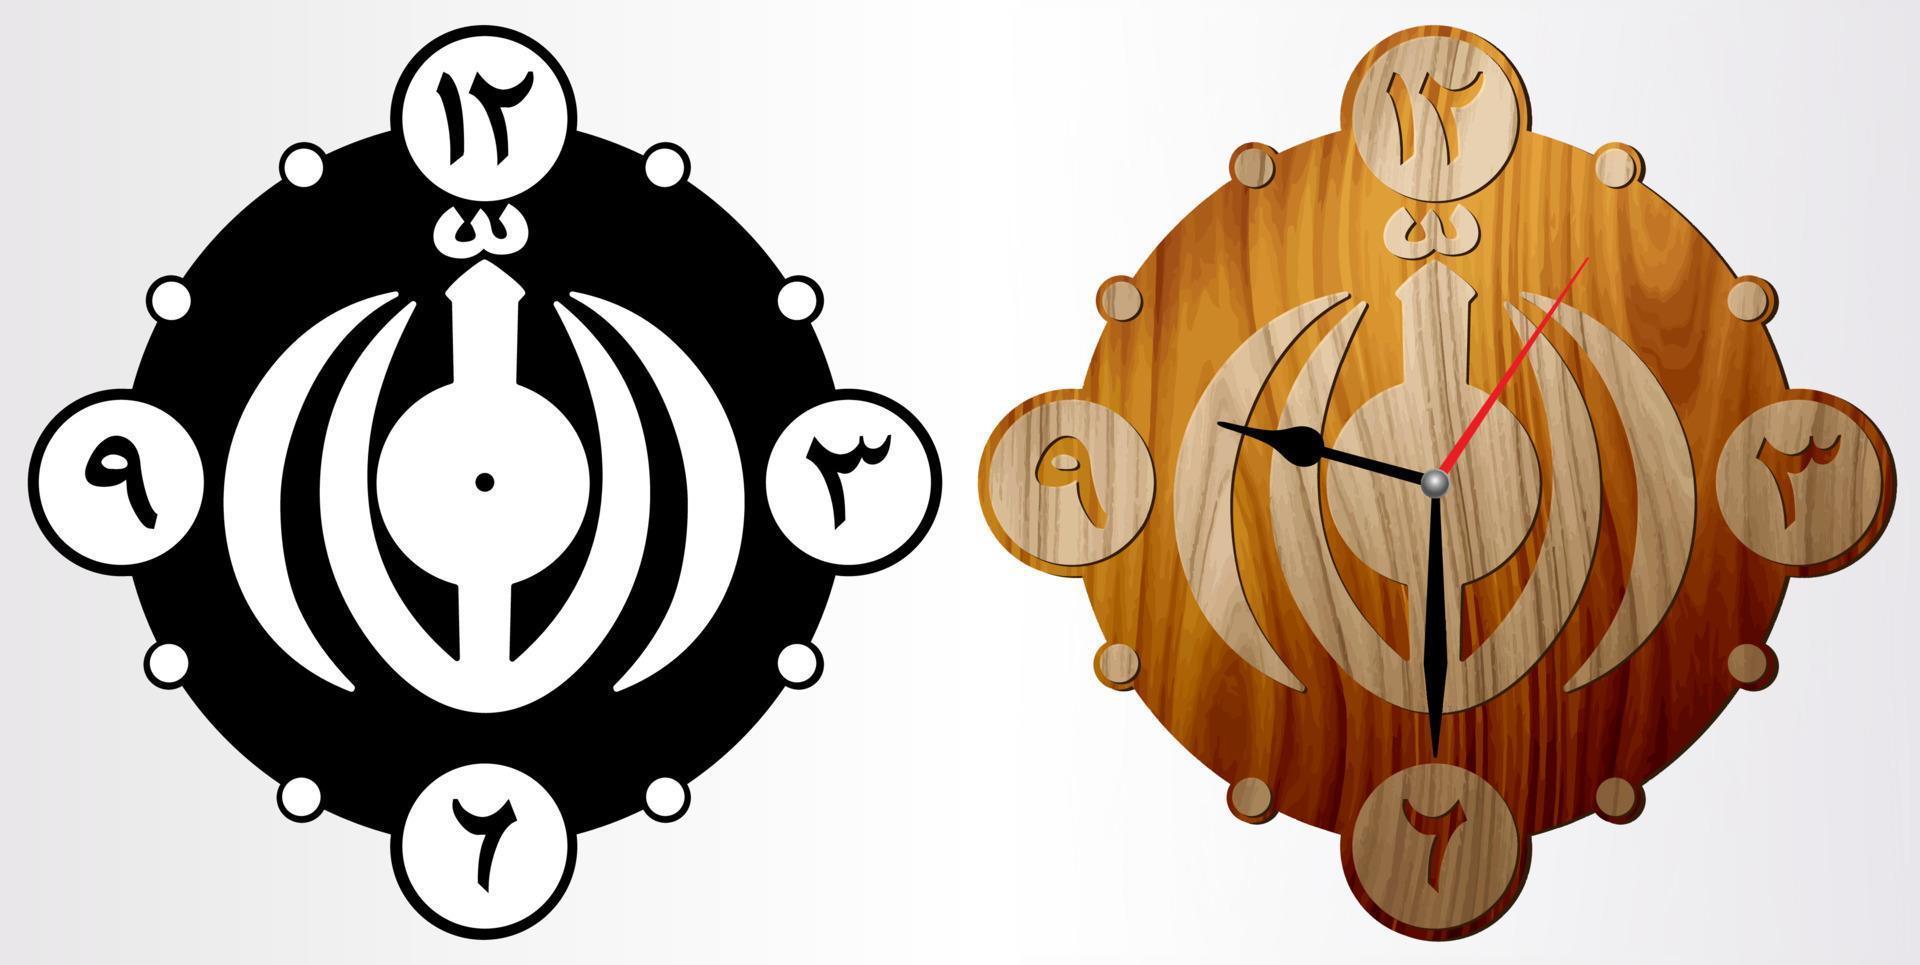 Calligraphic wall clock. Decor for home or office. Template for wood, metal plate or acrylic laser cutting vector